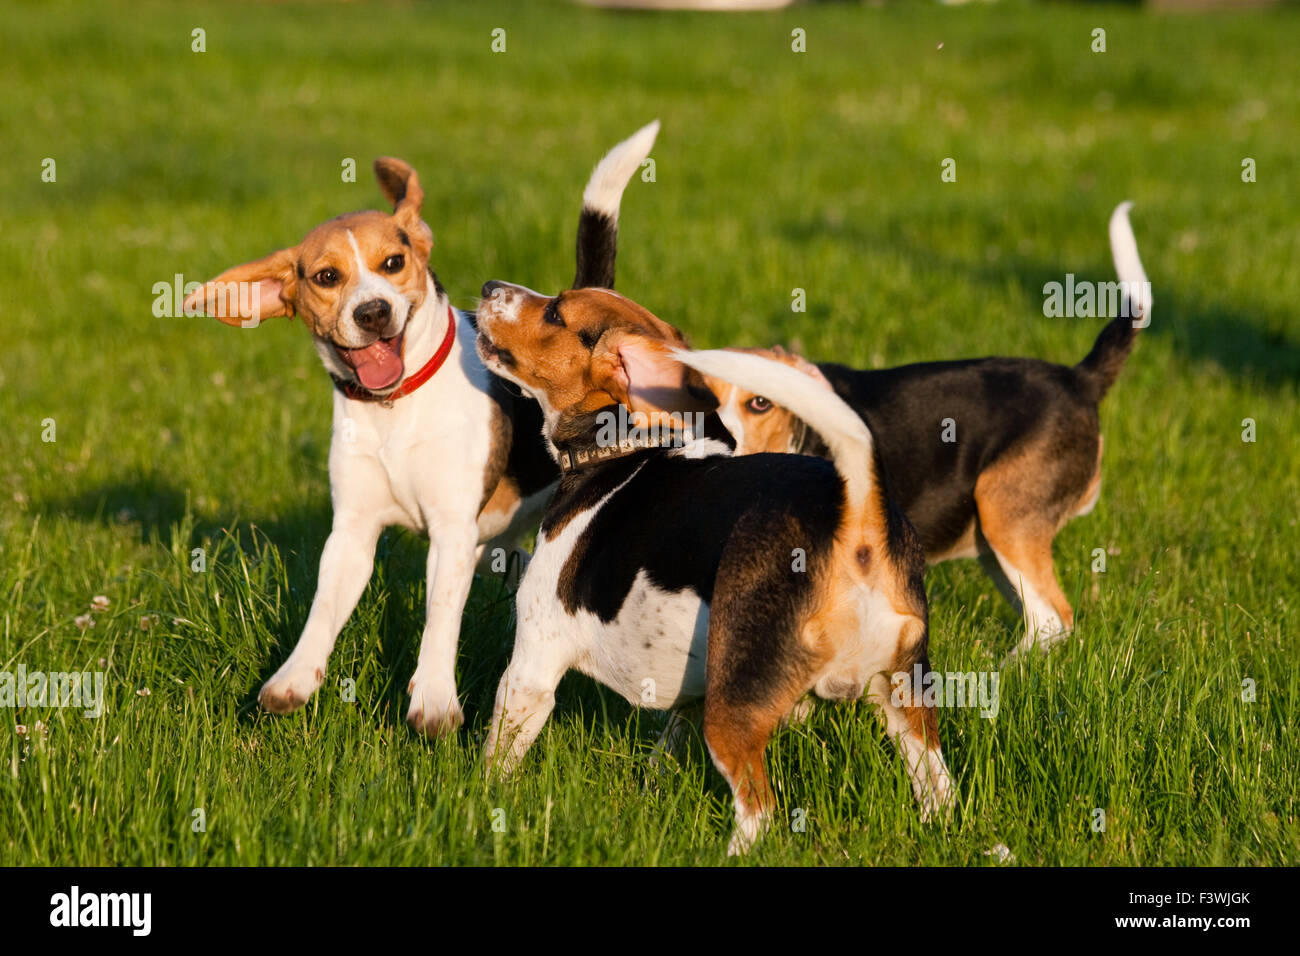 Energetic Beagle dog playing in a park